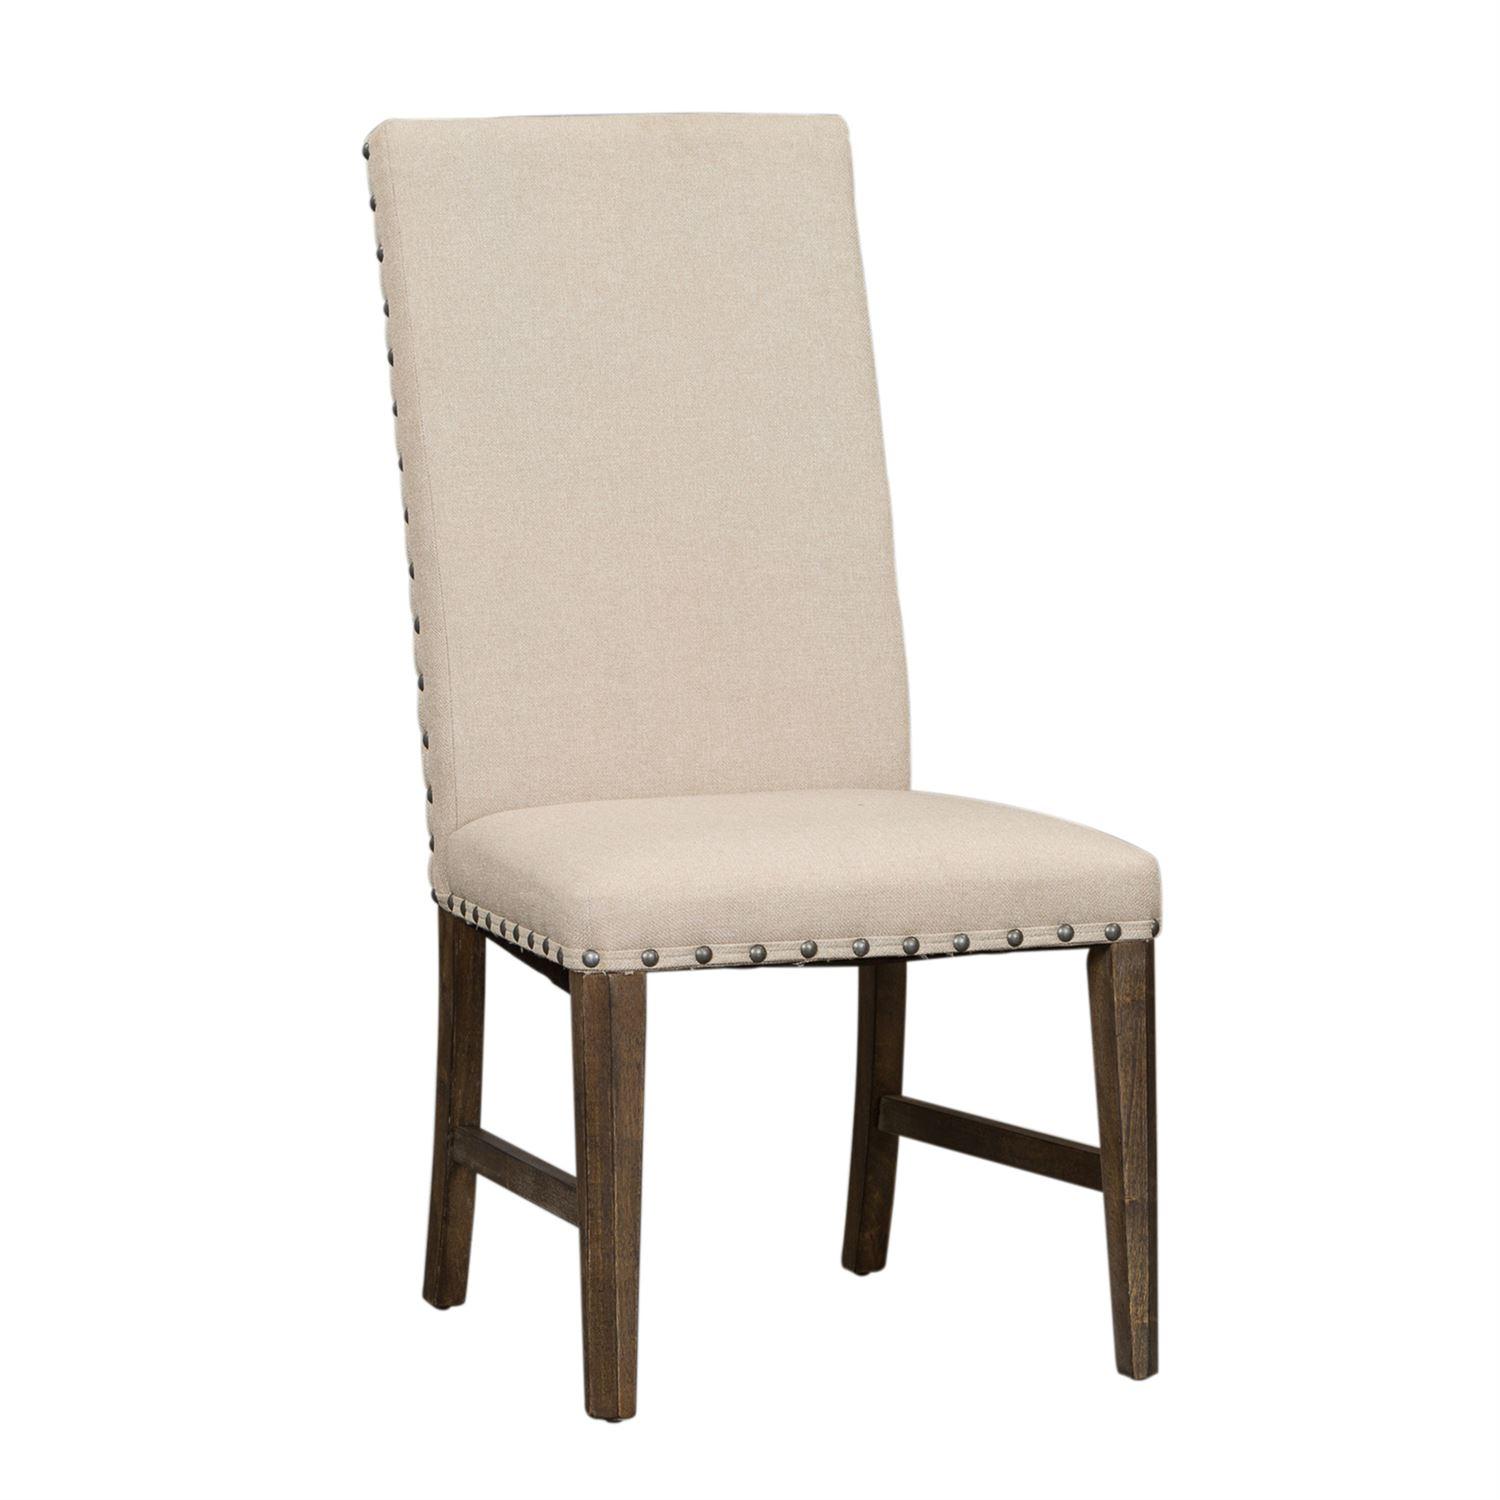 Urban Dining Side Chair Artisan Prairie  (823-DR) Dining Side Chair 823-C6501S in Gray 